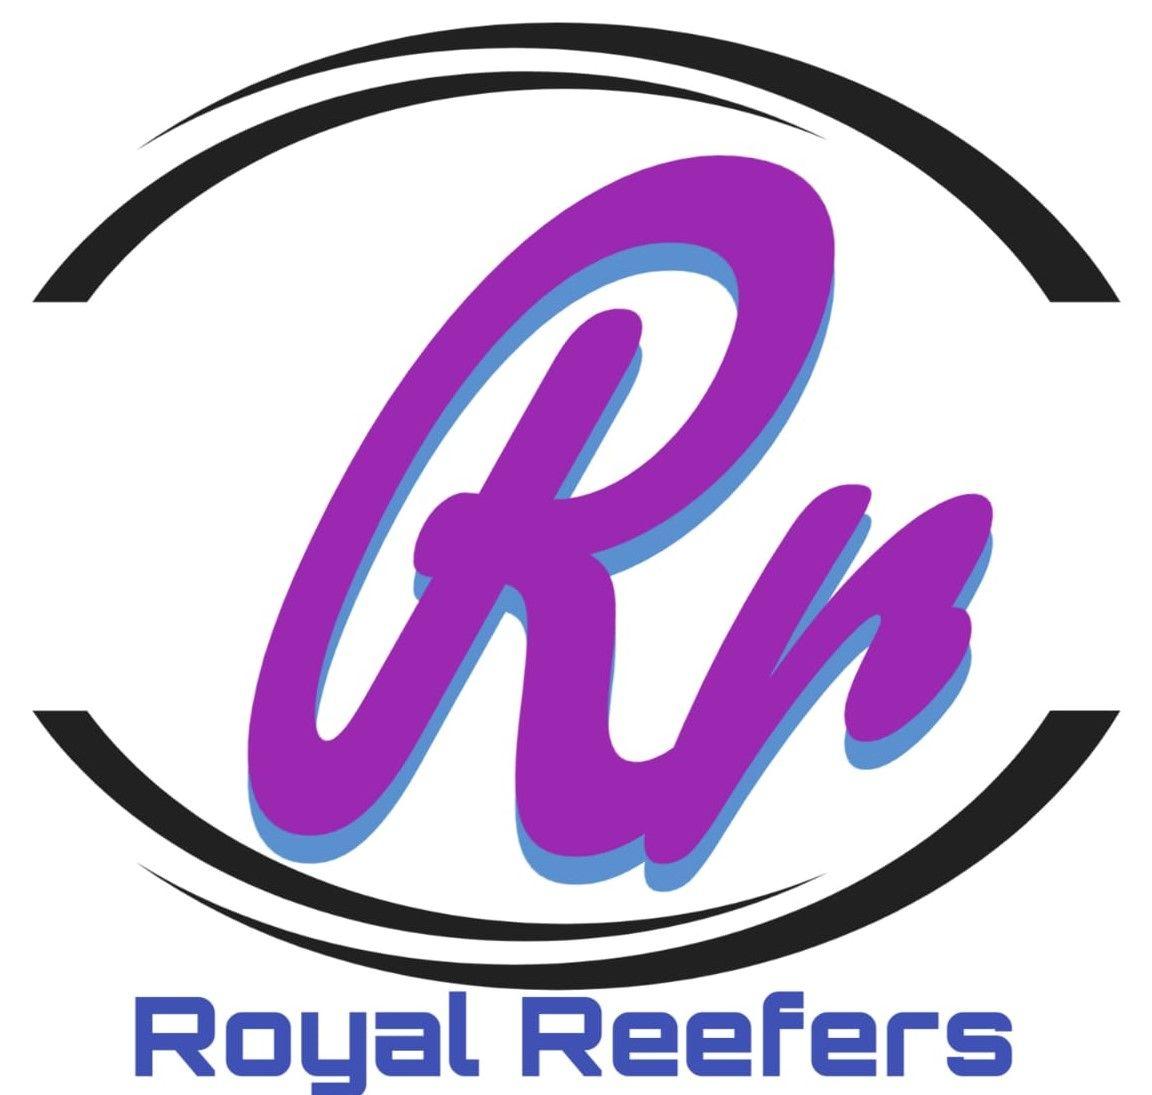 A1 Royalreefers Private Limited